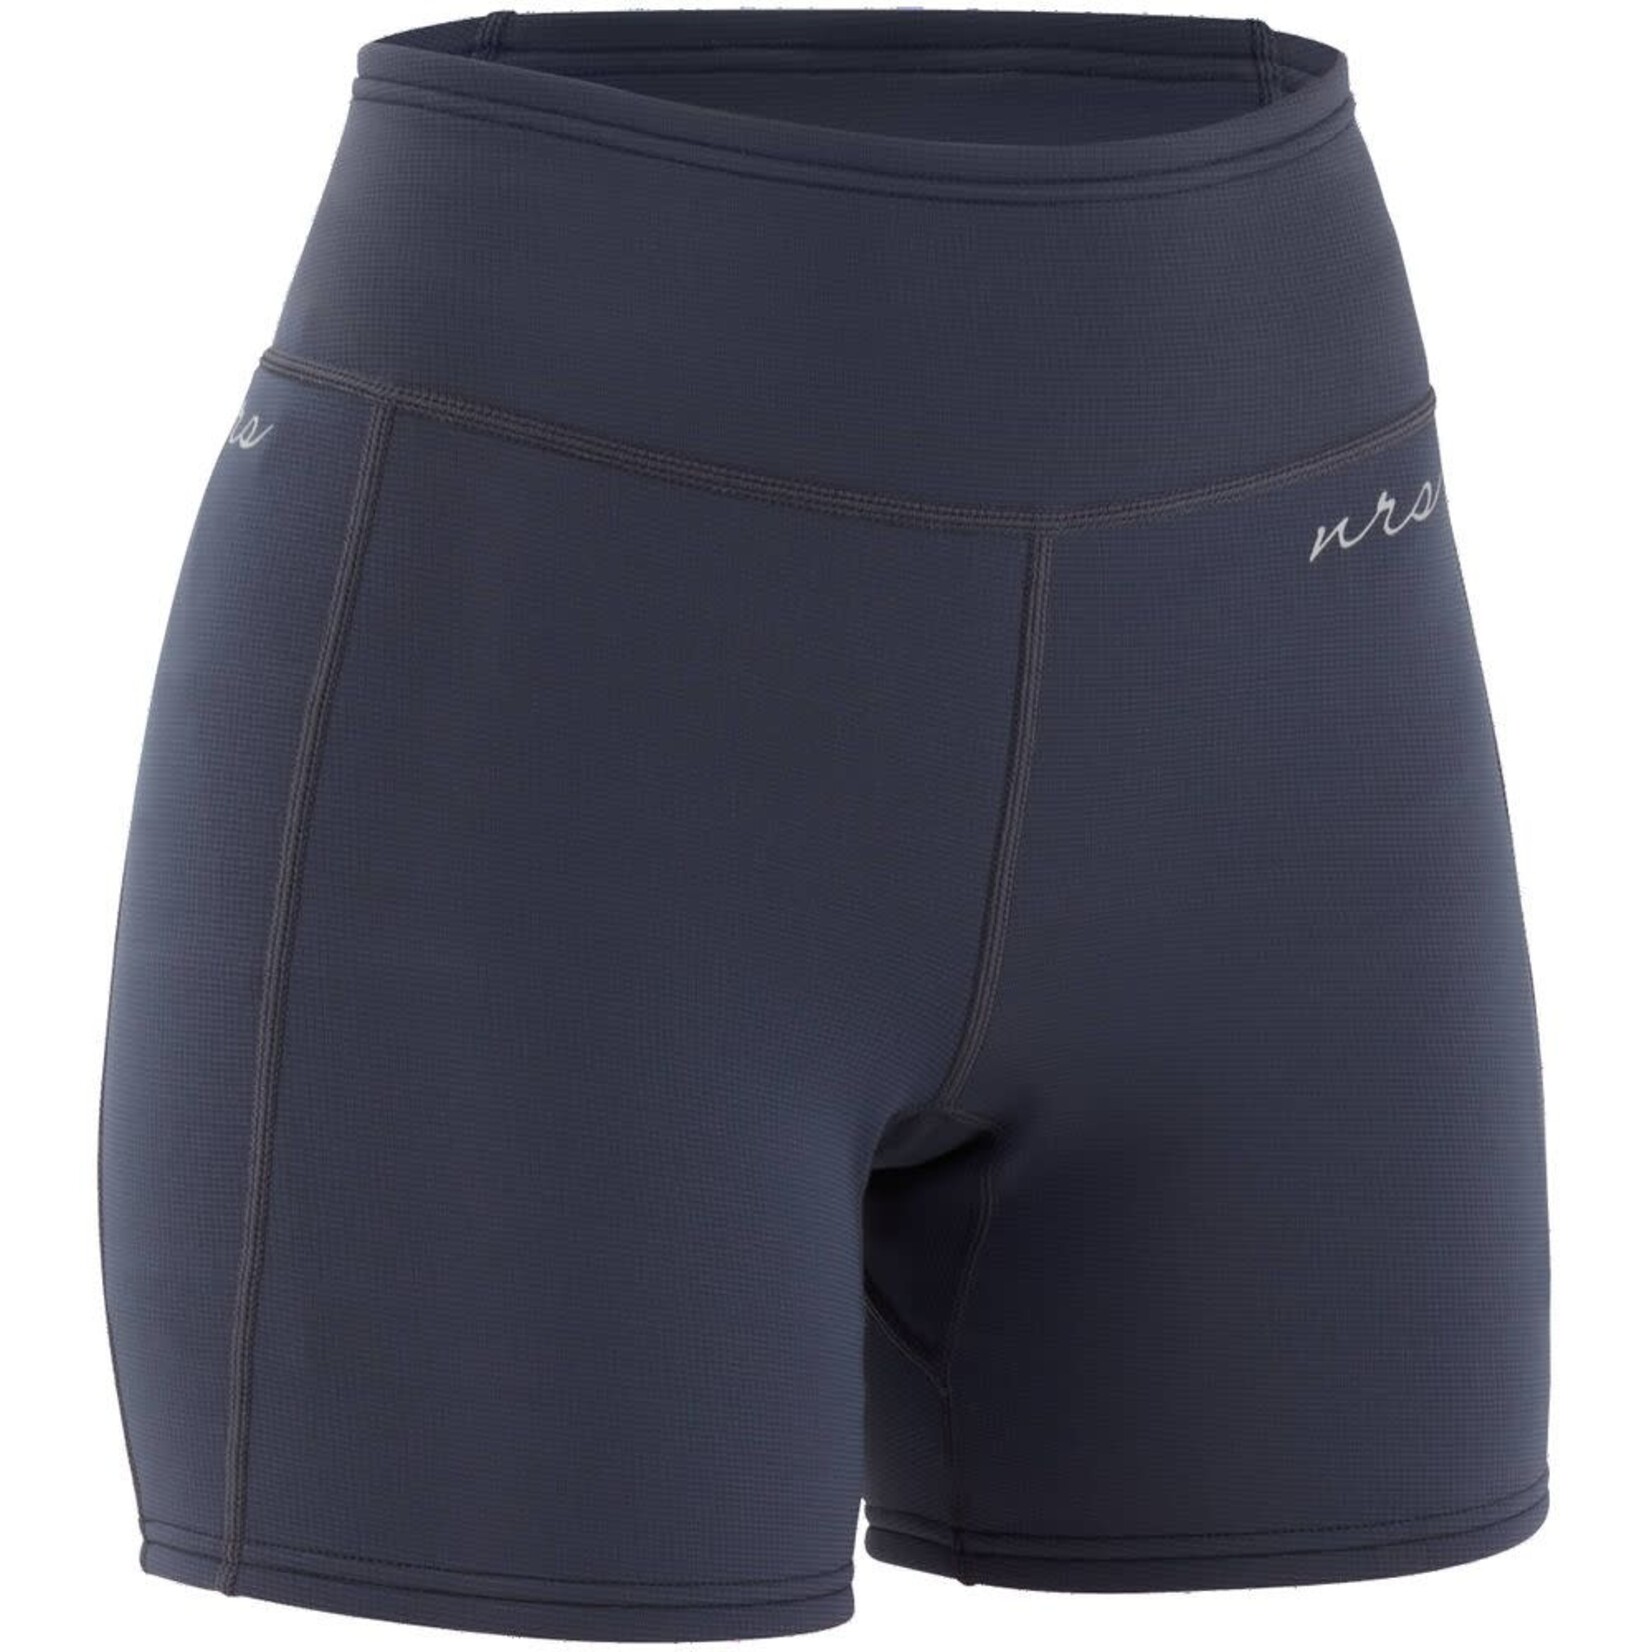 NRS Shorts Hydroskin 0.5 pour femmes